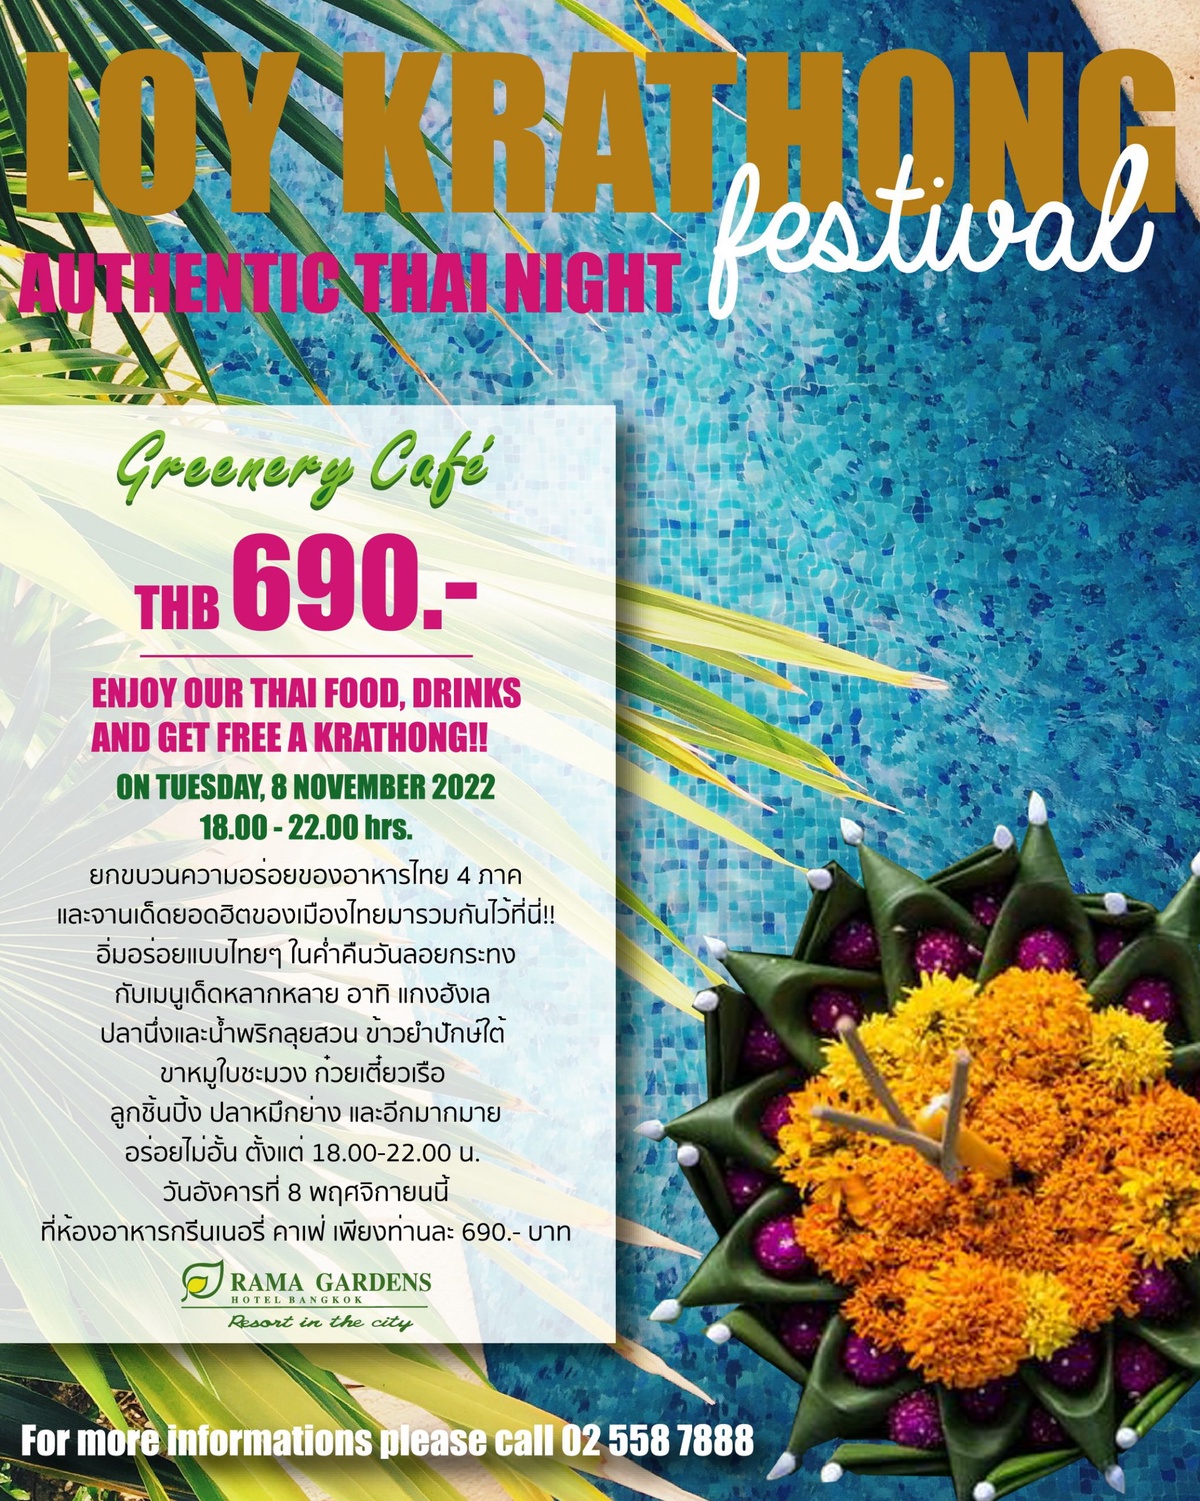 Loy Krathong with Authentic Thai Night